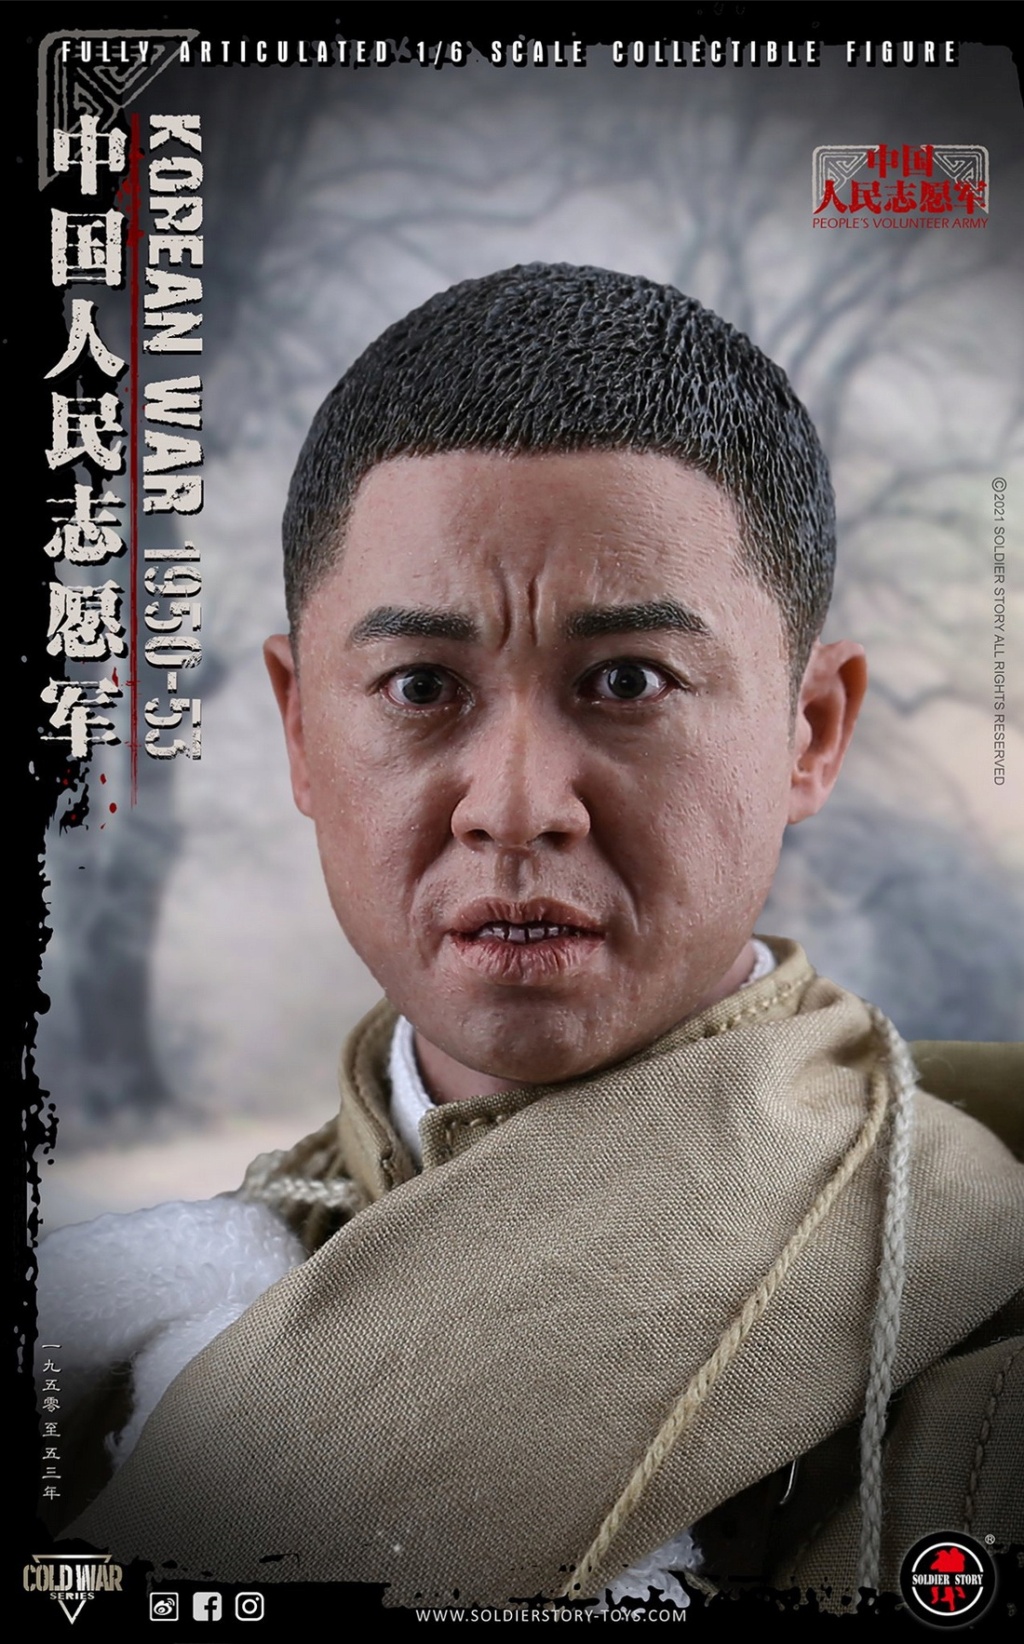 chinese - NEW PRODUCT: SOLDIER STORY: 1/6 Chinese People’s Volunteers 1950-53 Collectible Action Figure (#SS-124) 9d465210